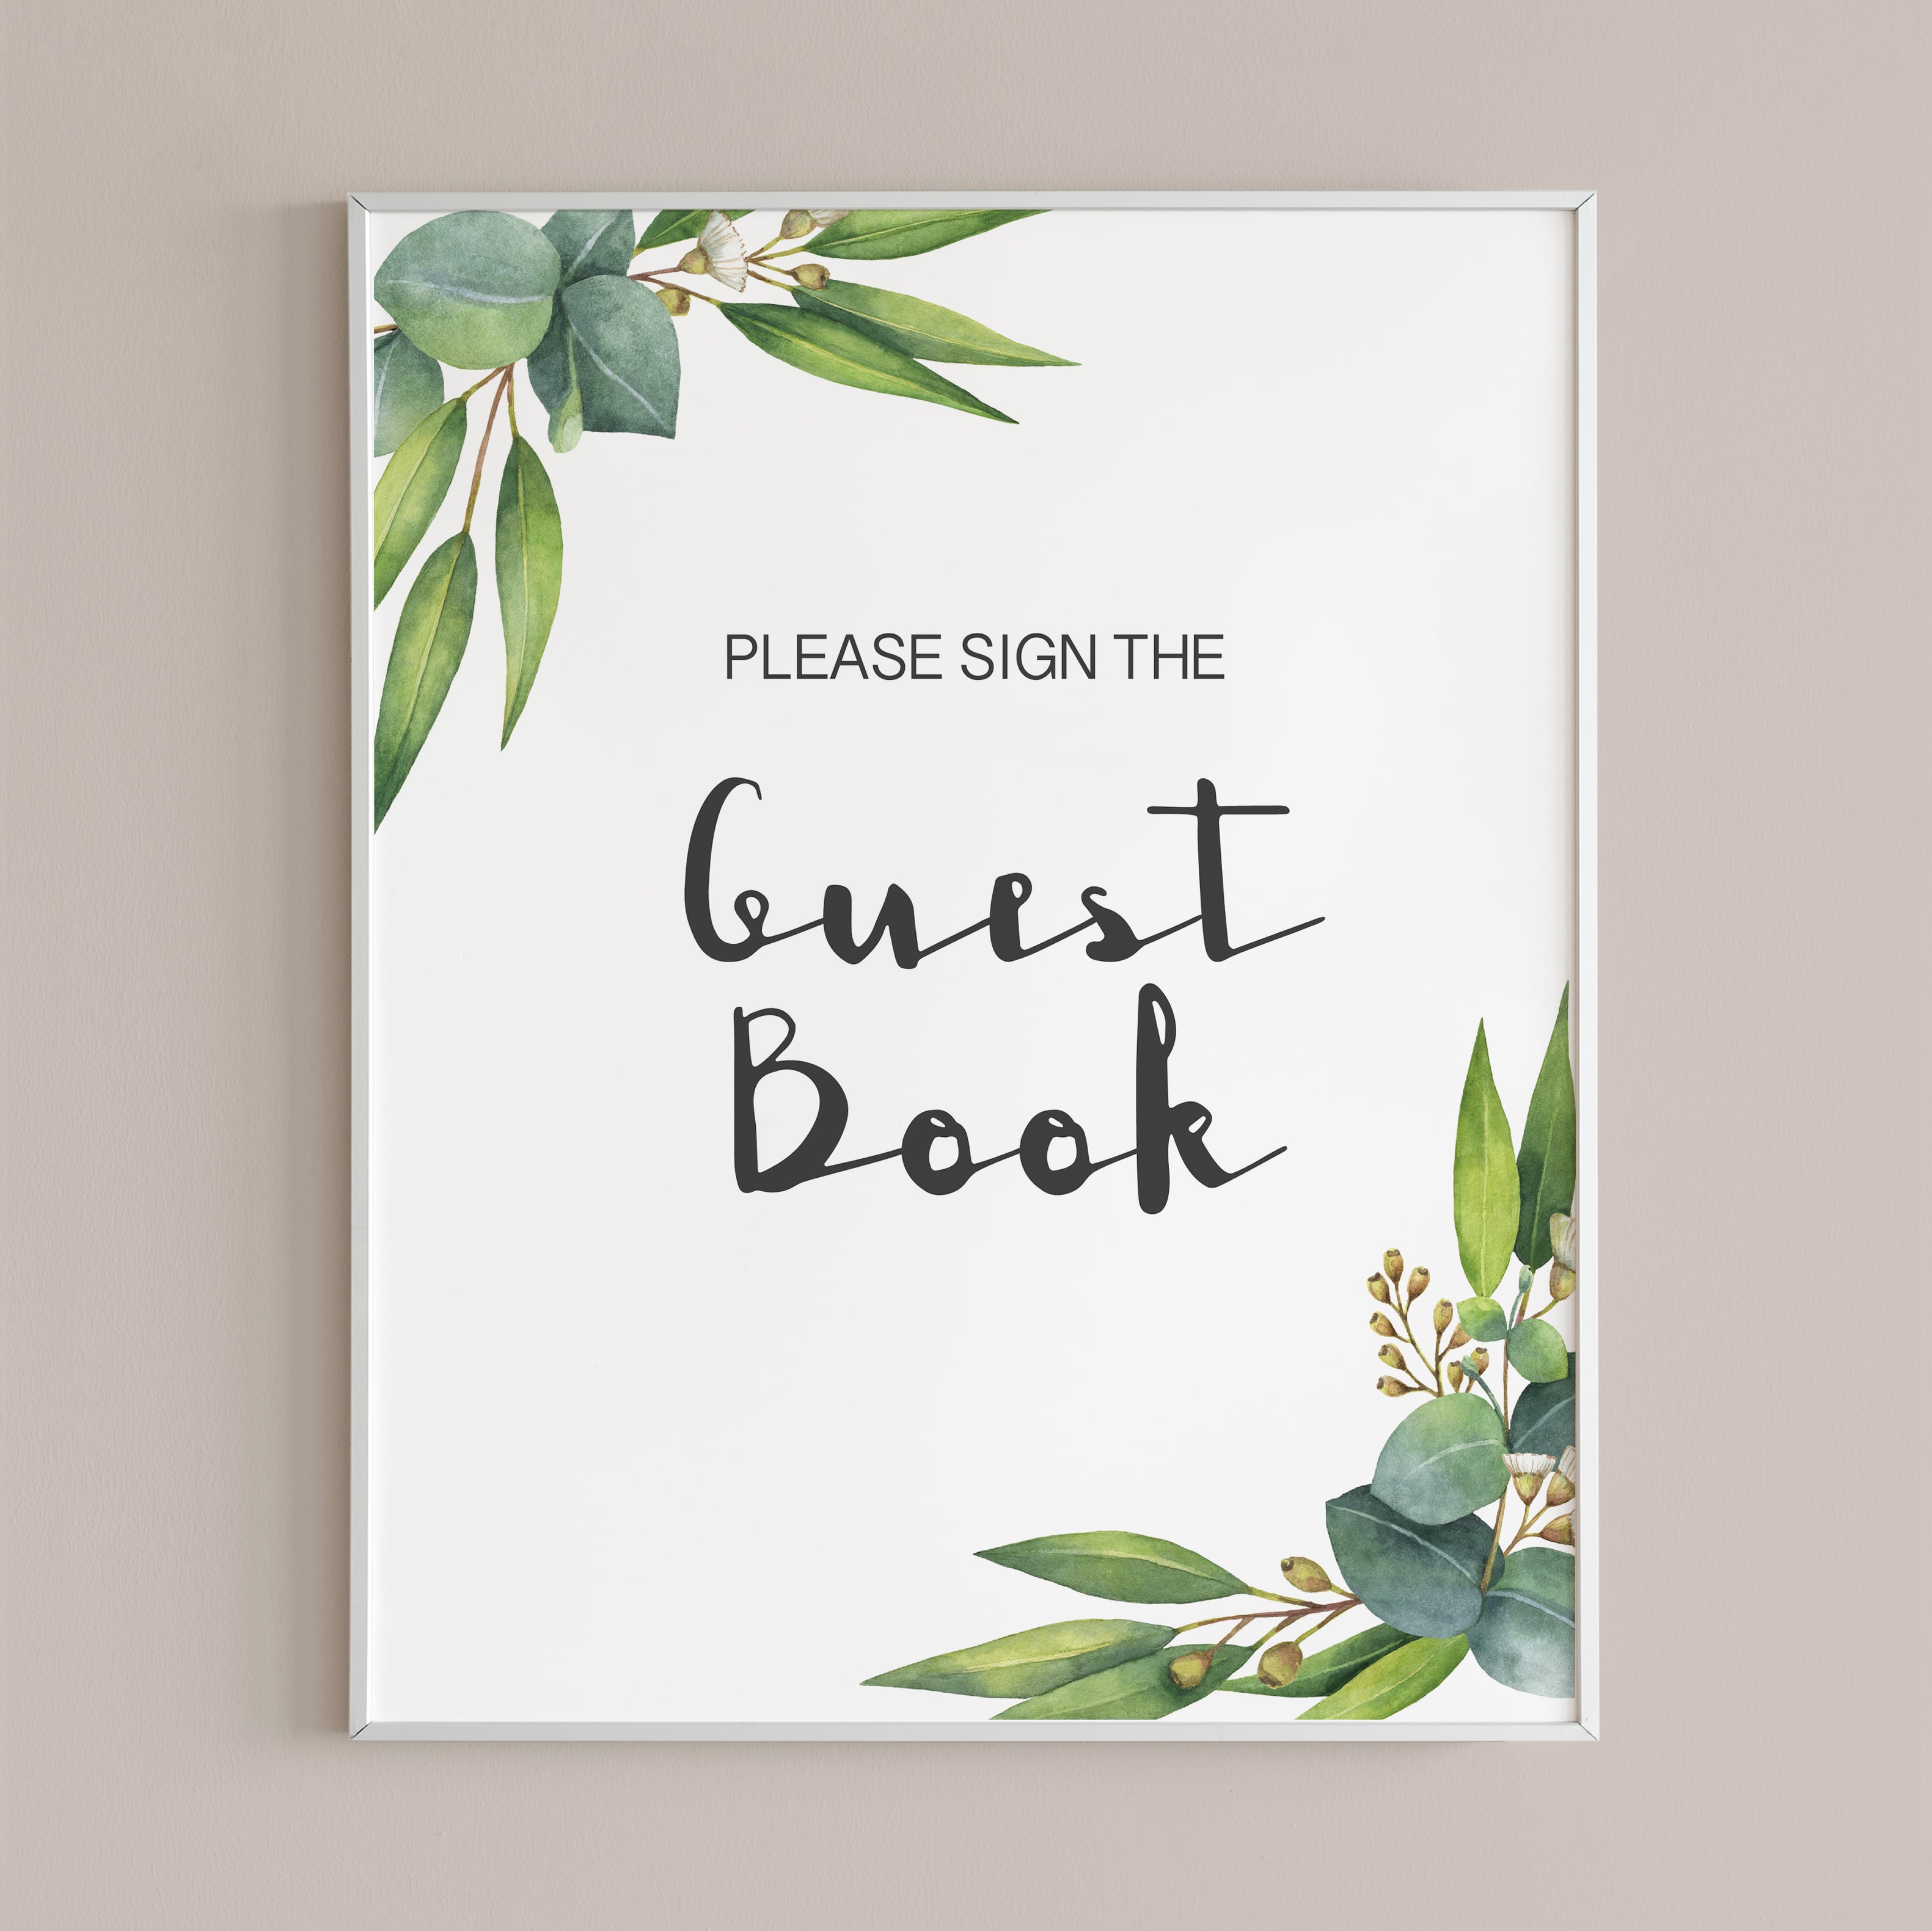 Sign the guest book sign green leaves instant download by LittleSizzle